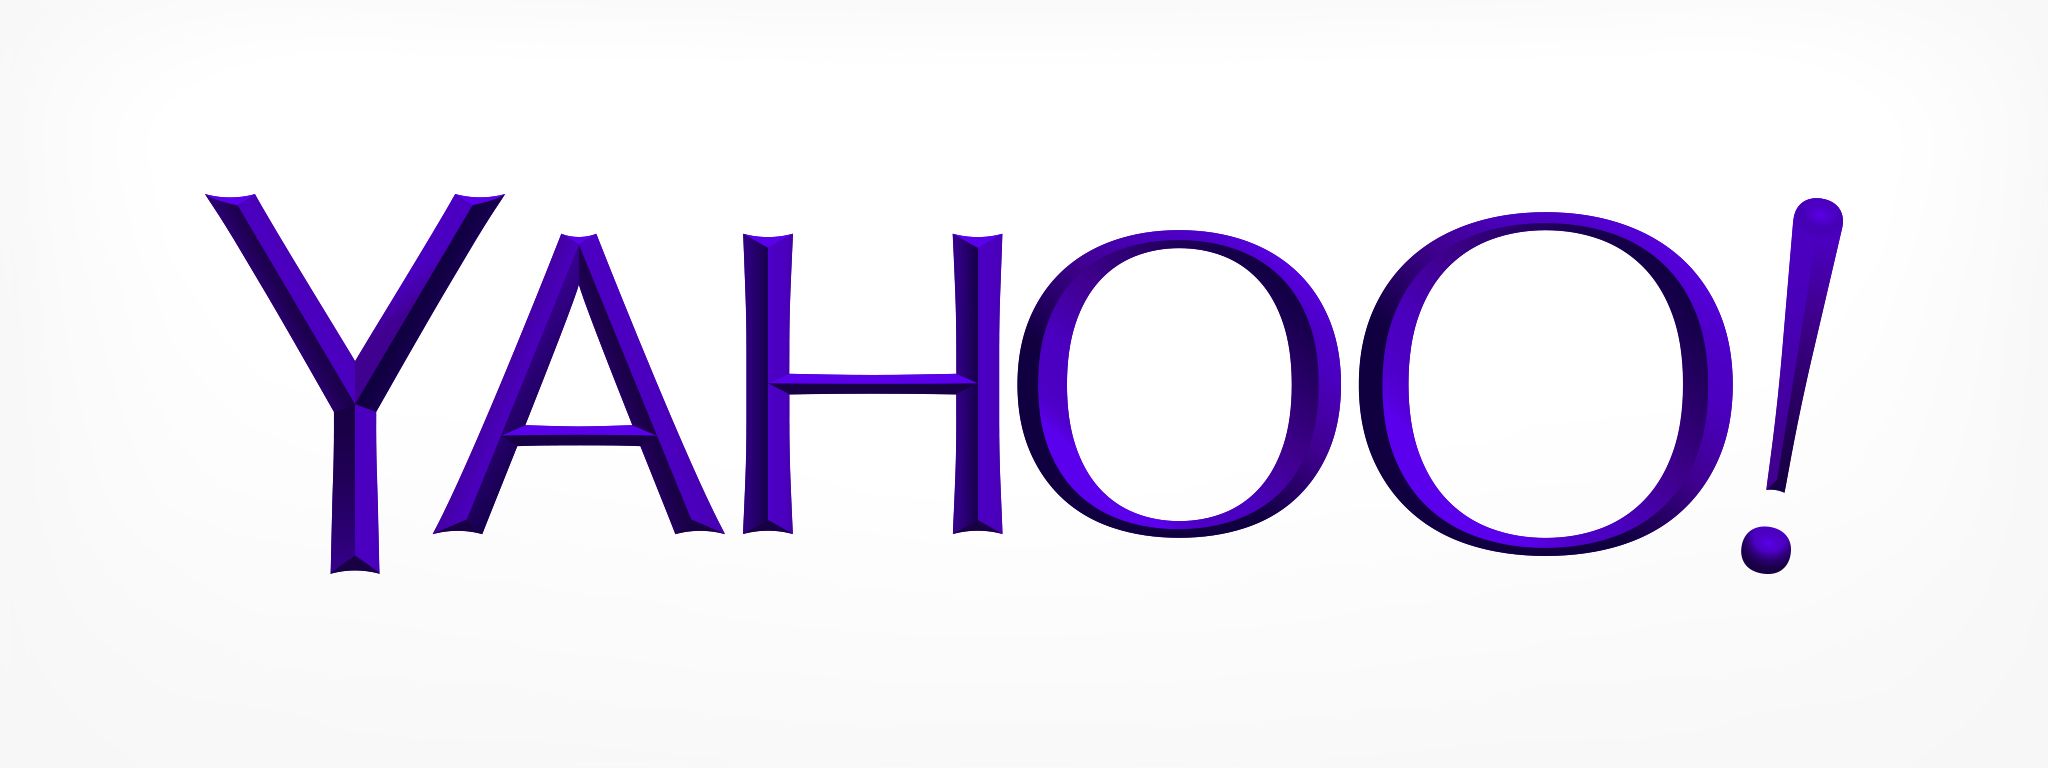 yahoo free clipart images - photo #2